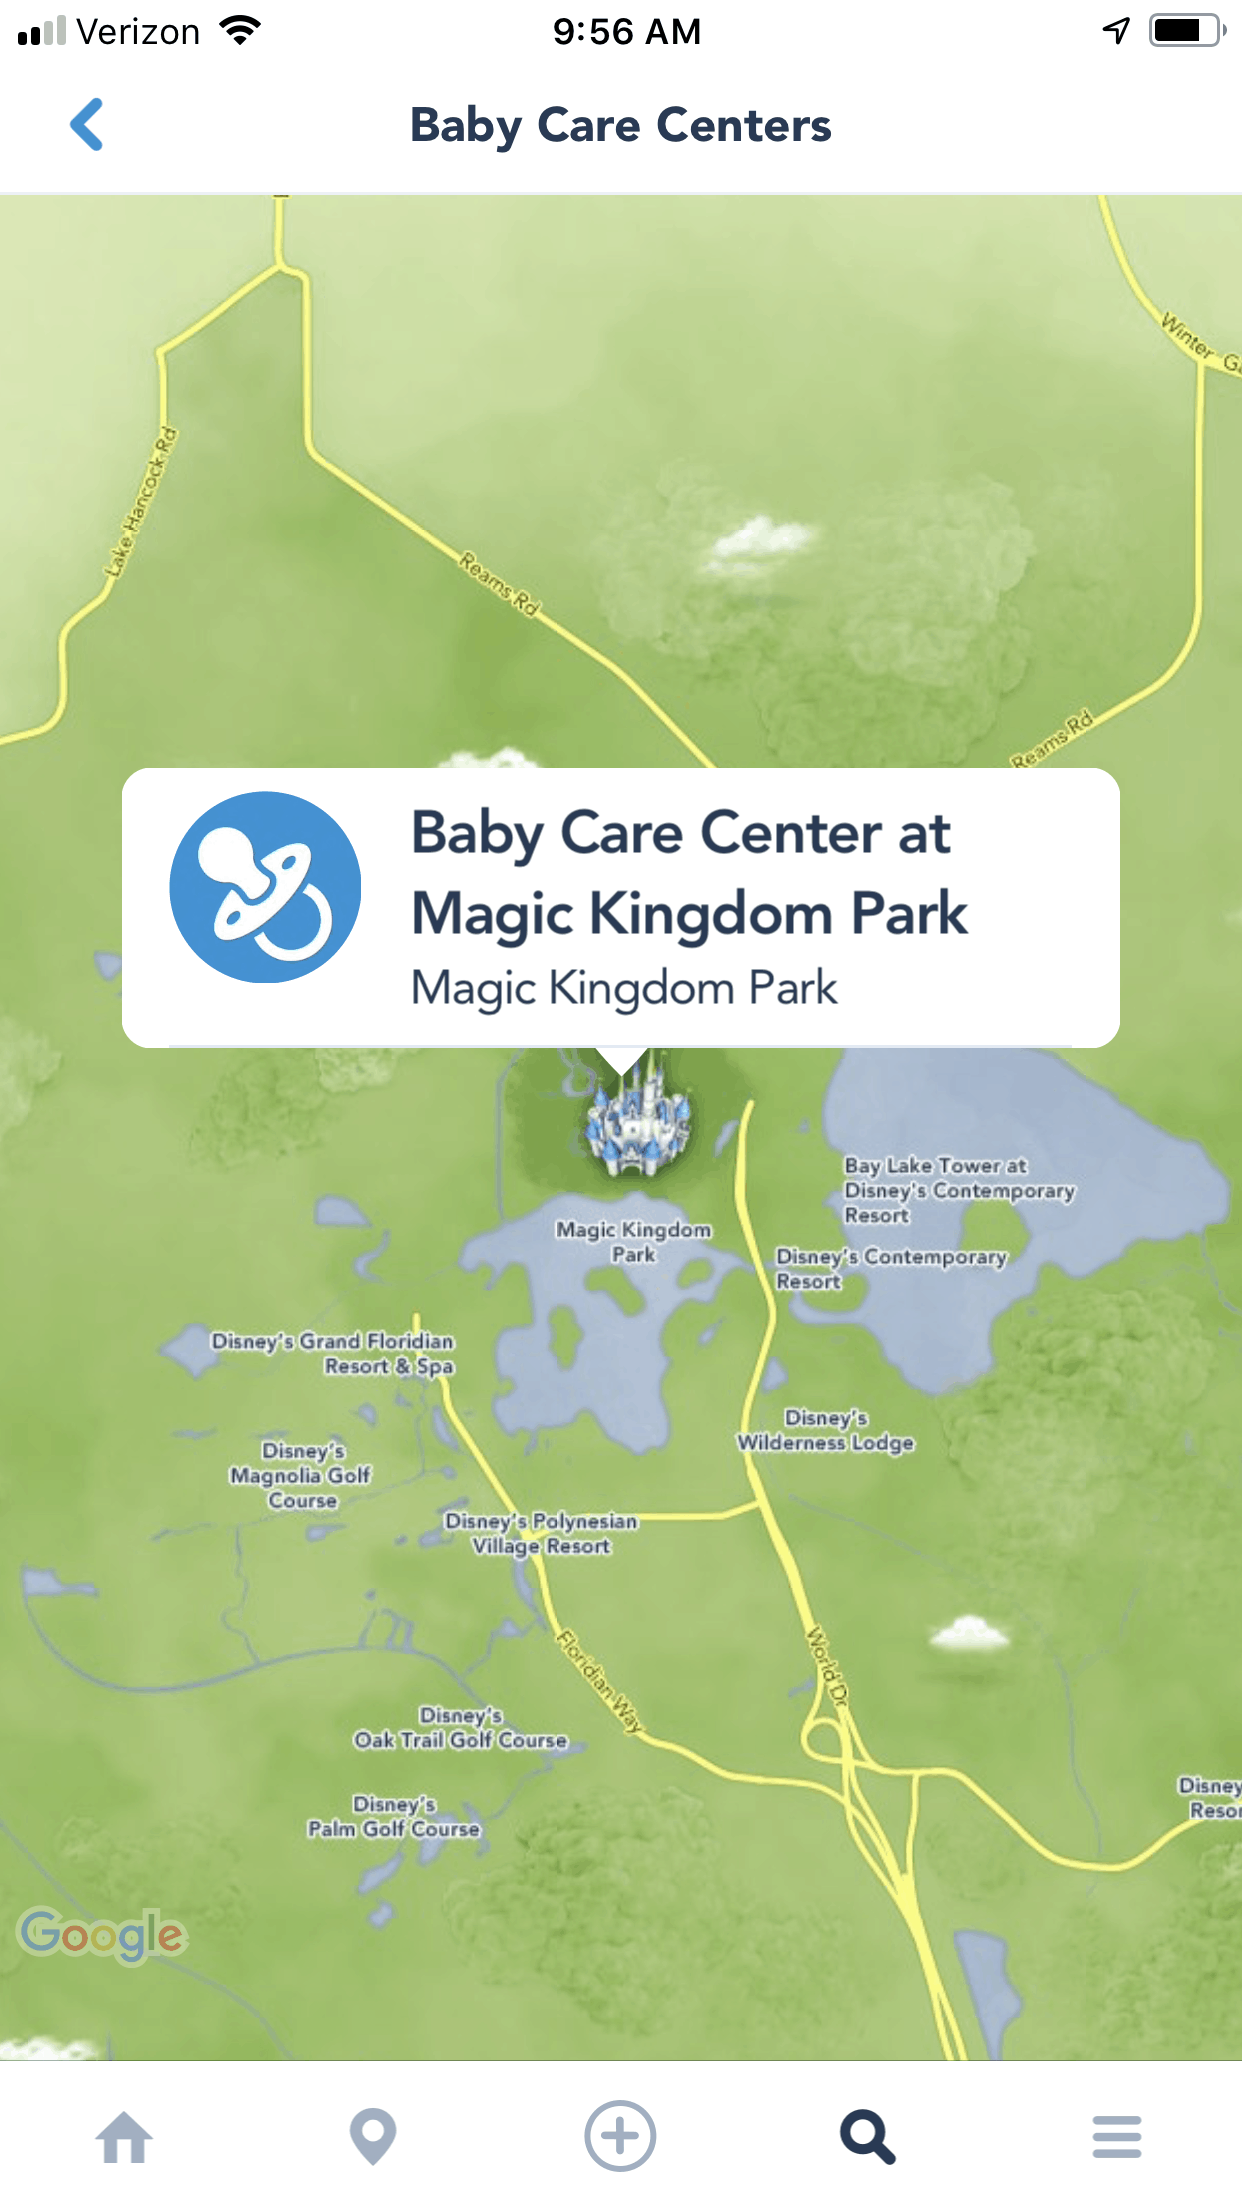 Here’s why the Baby Care Centers at Disney World are perfect for families